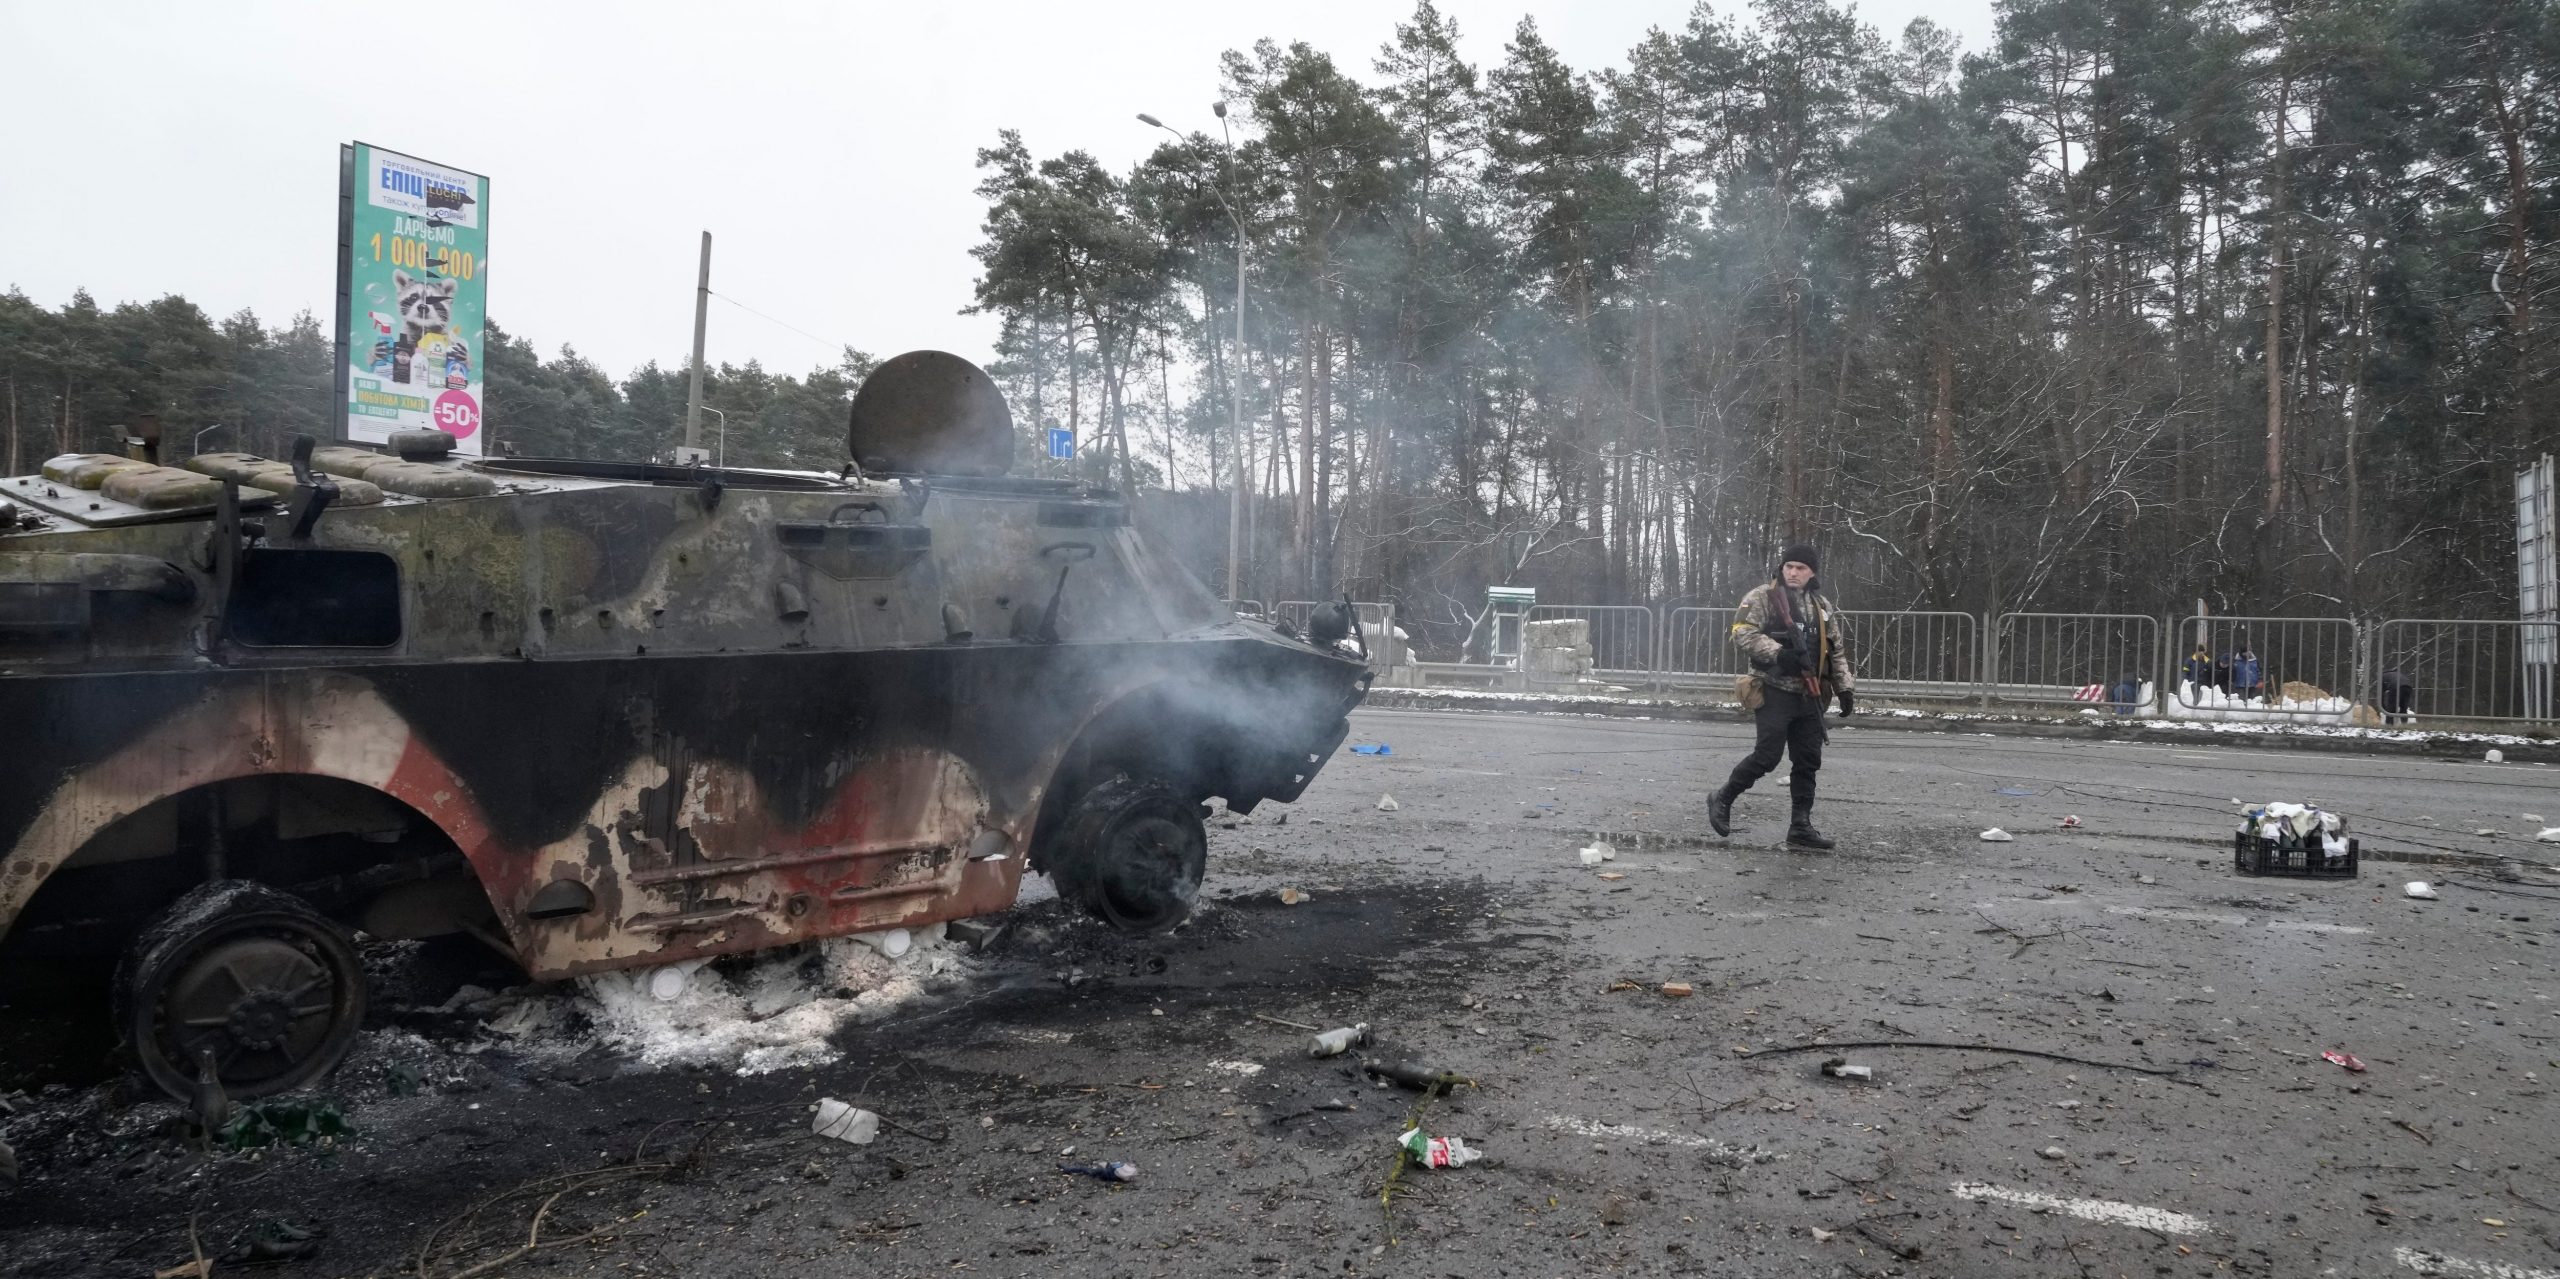 A volunteer of Ukraine's Territorial Defense Forces walks by a damaged armored vehicle at a checkpoint in Brovary, outside Kyiv, Ukraine, Tuesday, March 1, 2022